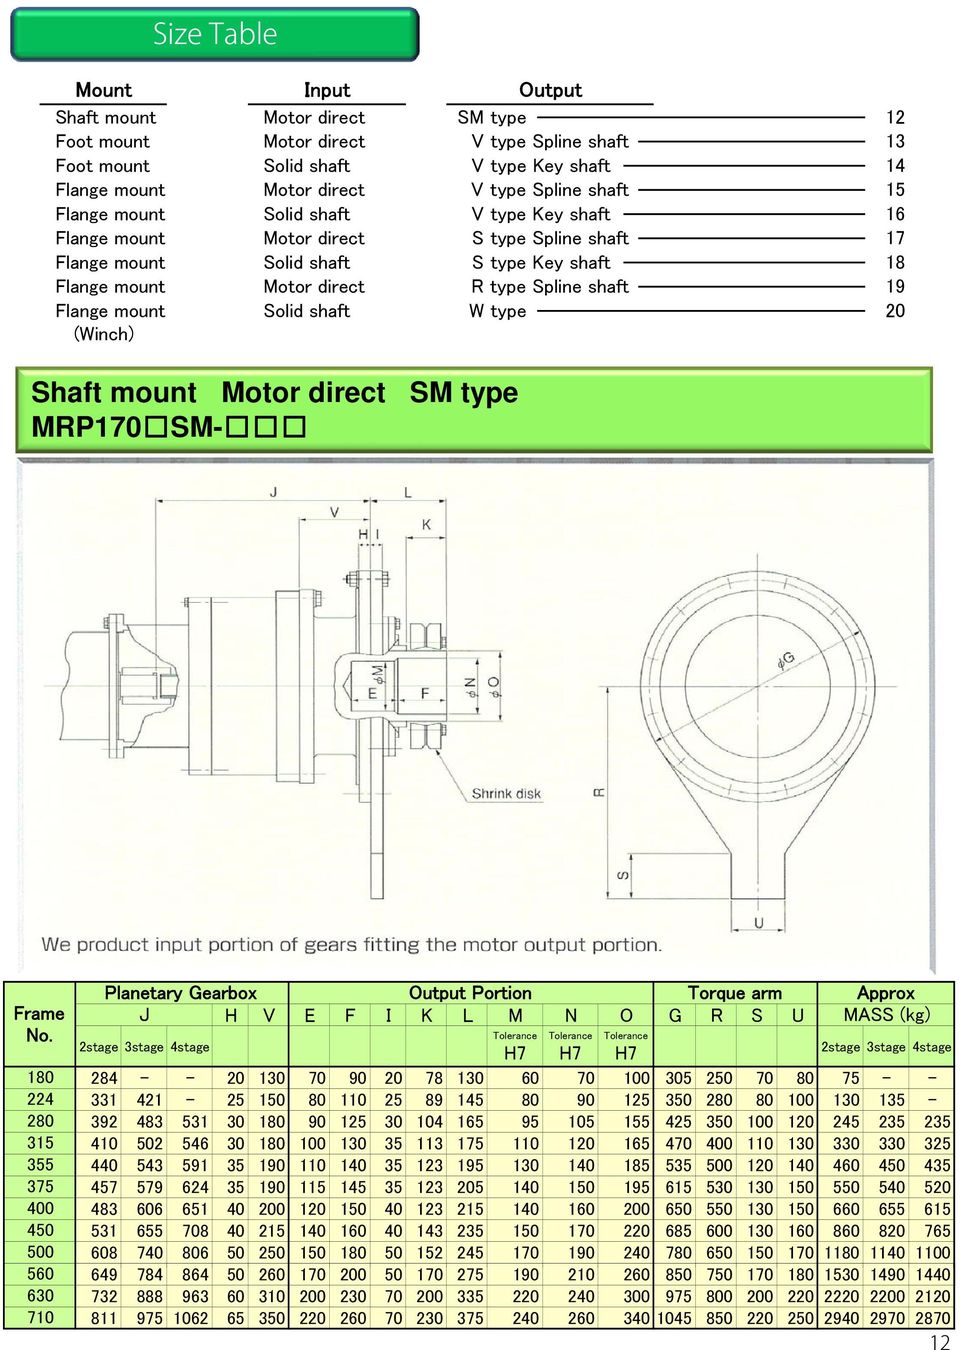 mount Solid shaft W type 20 (Winch) Shaft mount Motor direct SM type MRP170 SM- 180 224 280 315 355 375 400 450 500 560 630 710 Output Portion Torque arm J H V E F I K L M N O G R S U Approx MASS